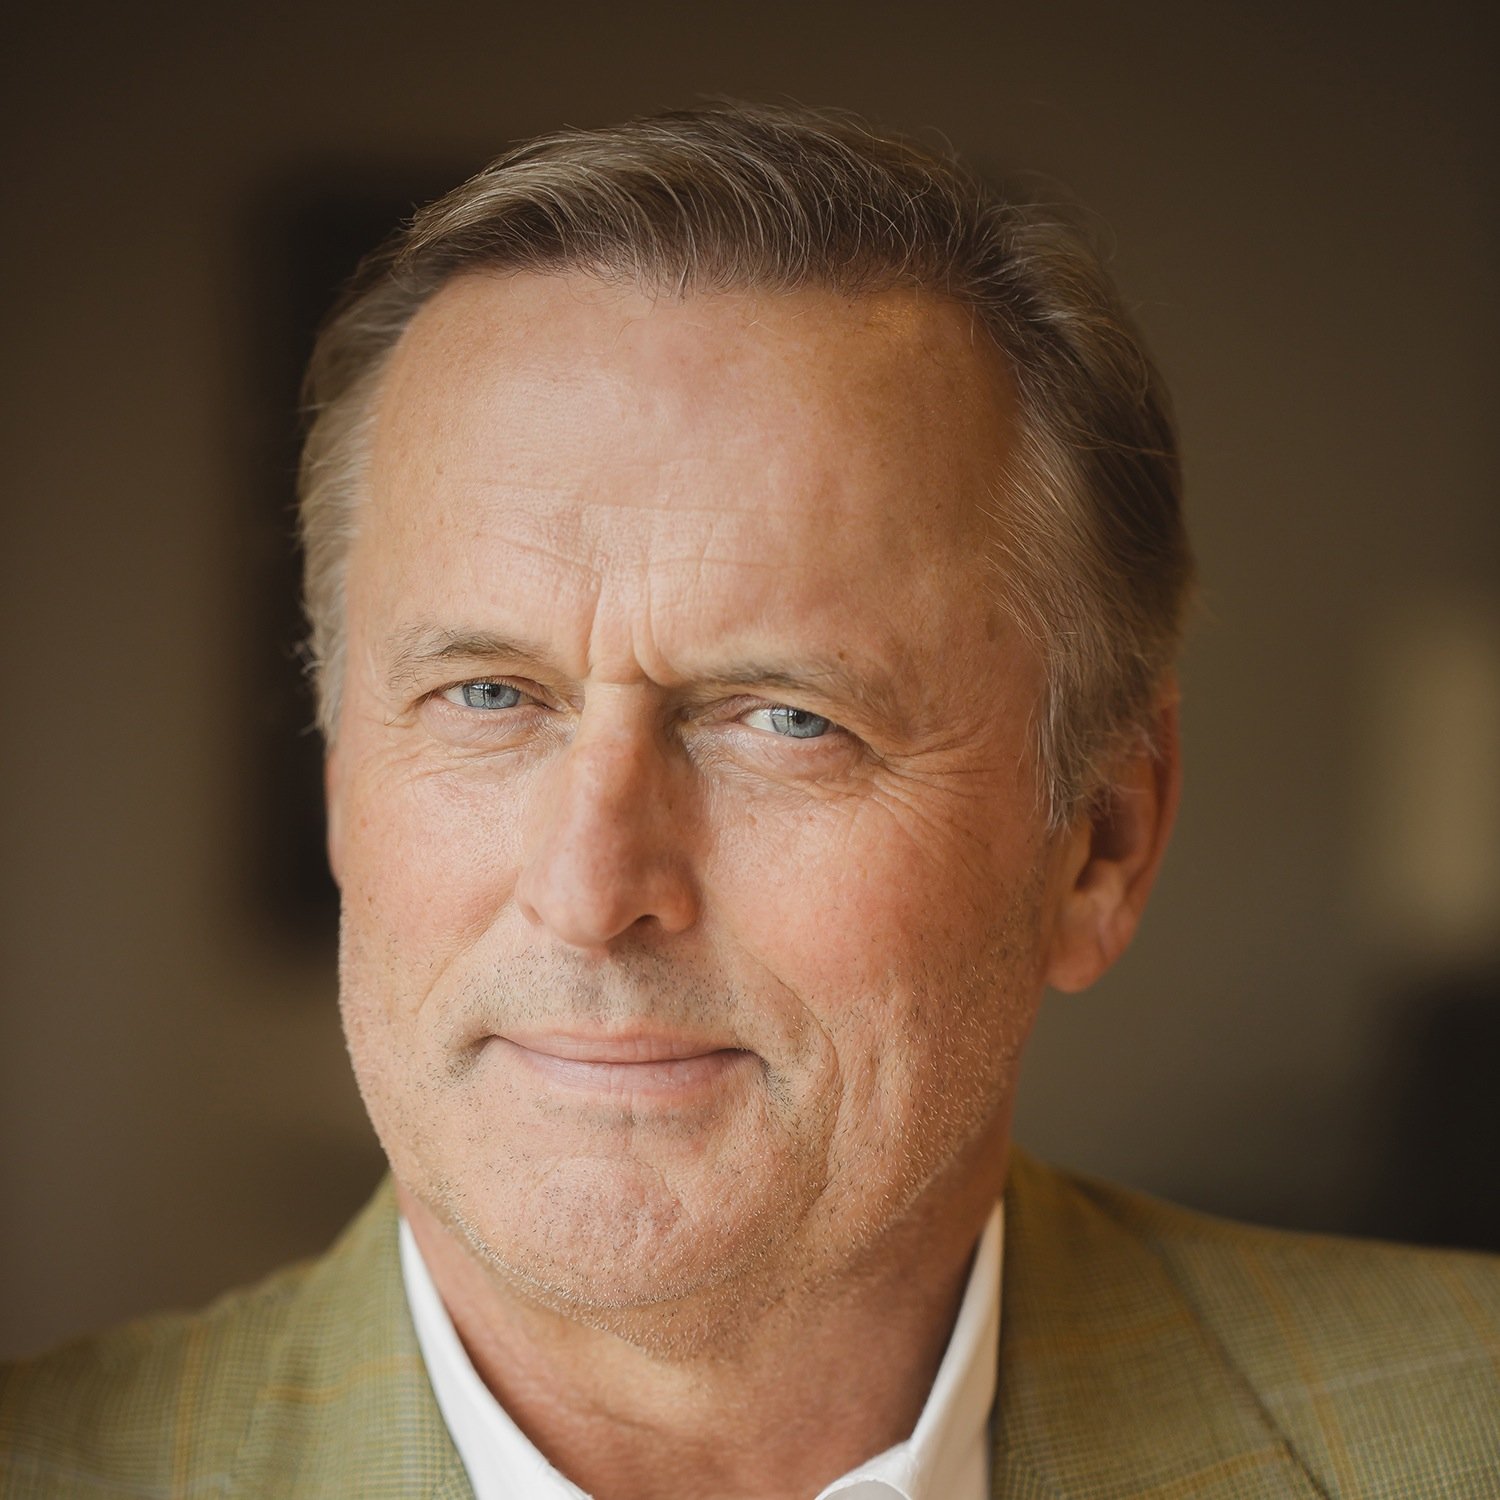 John Grisham takes on a bad judge in his uneven new novel ‘The Whistler